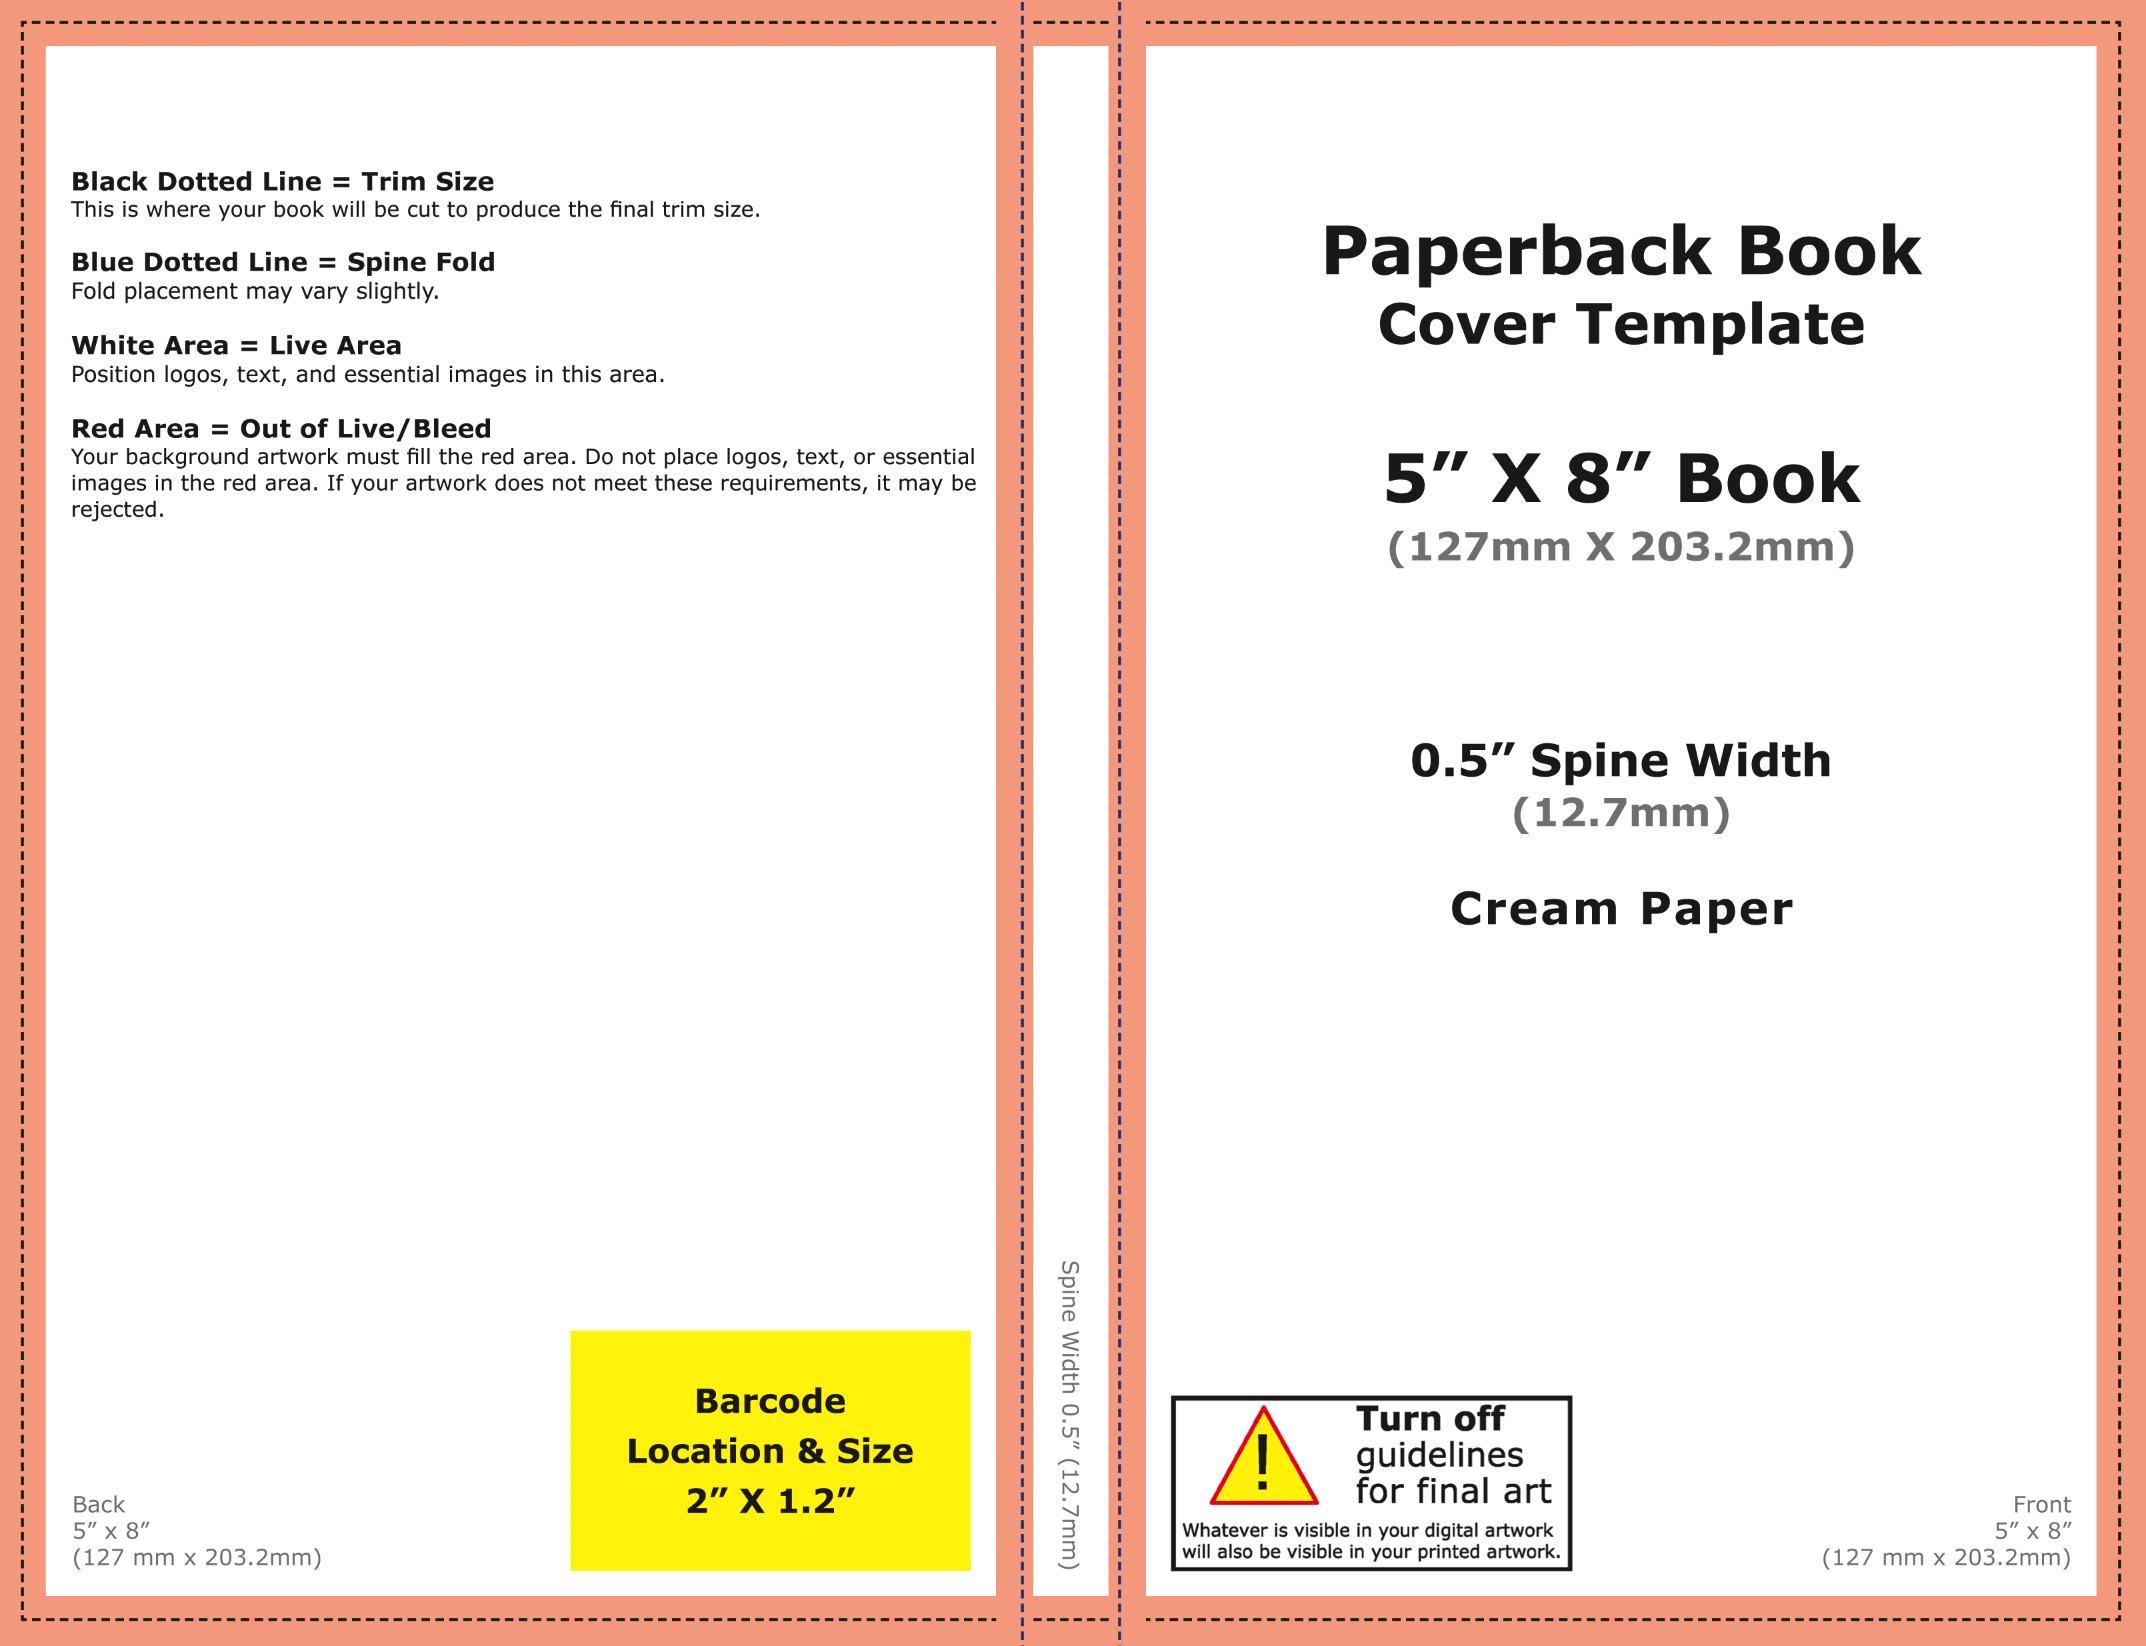 Amazon Kdp Paperback Template TUTORE ORG Master Of Documents